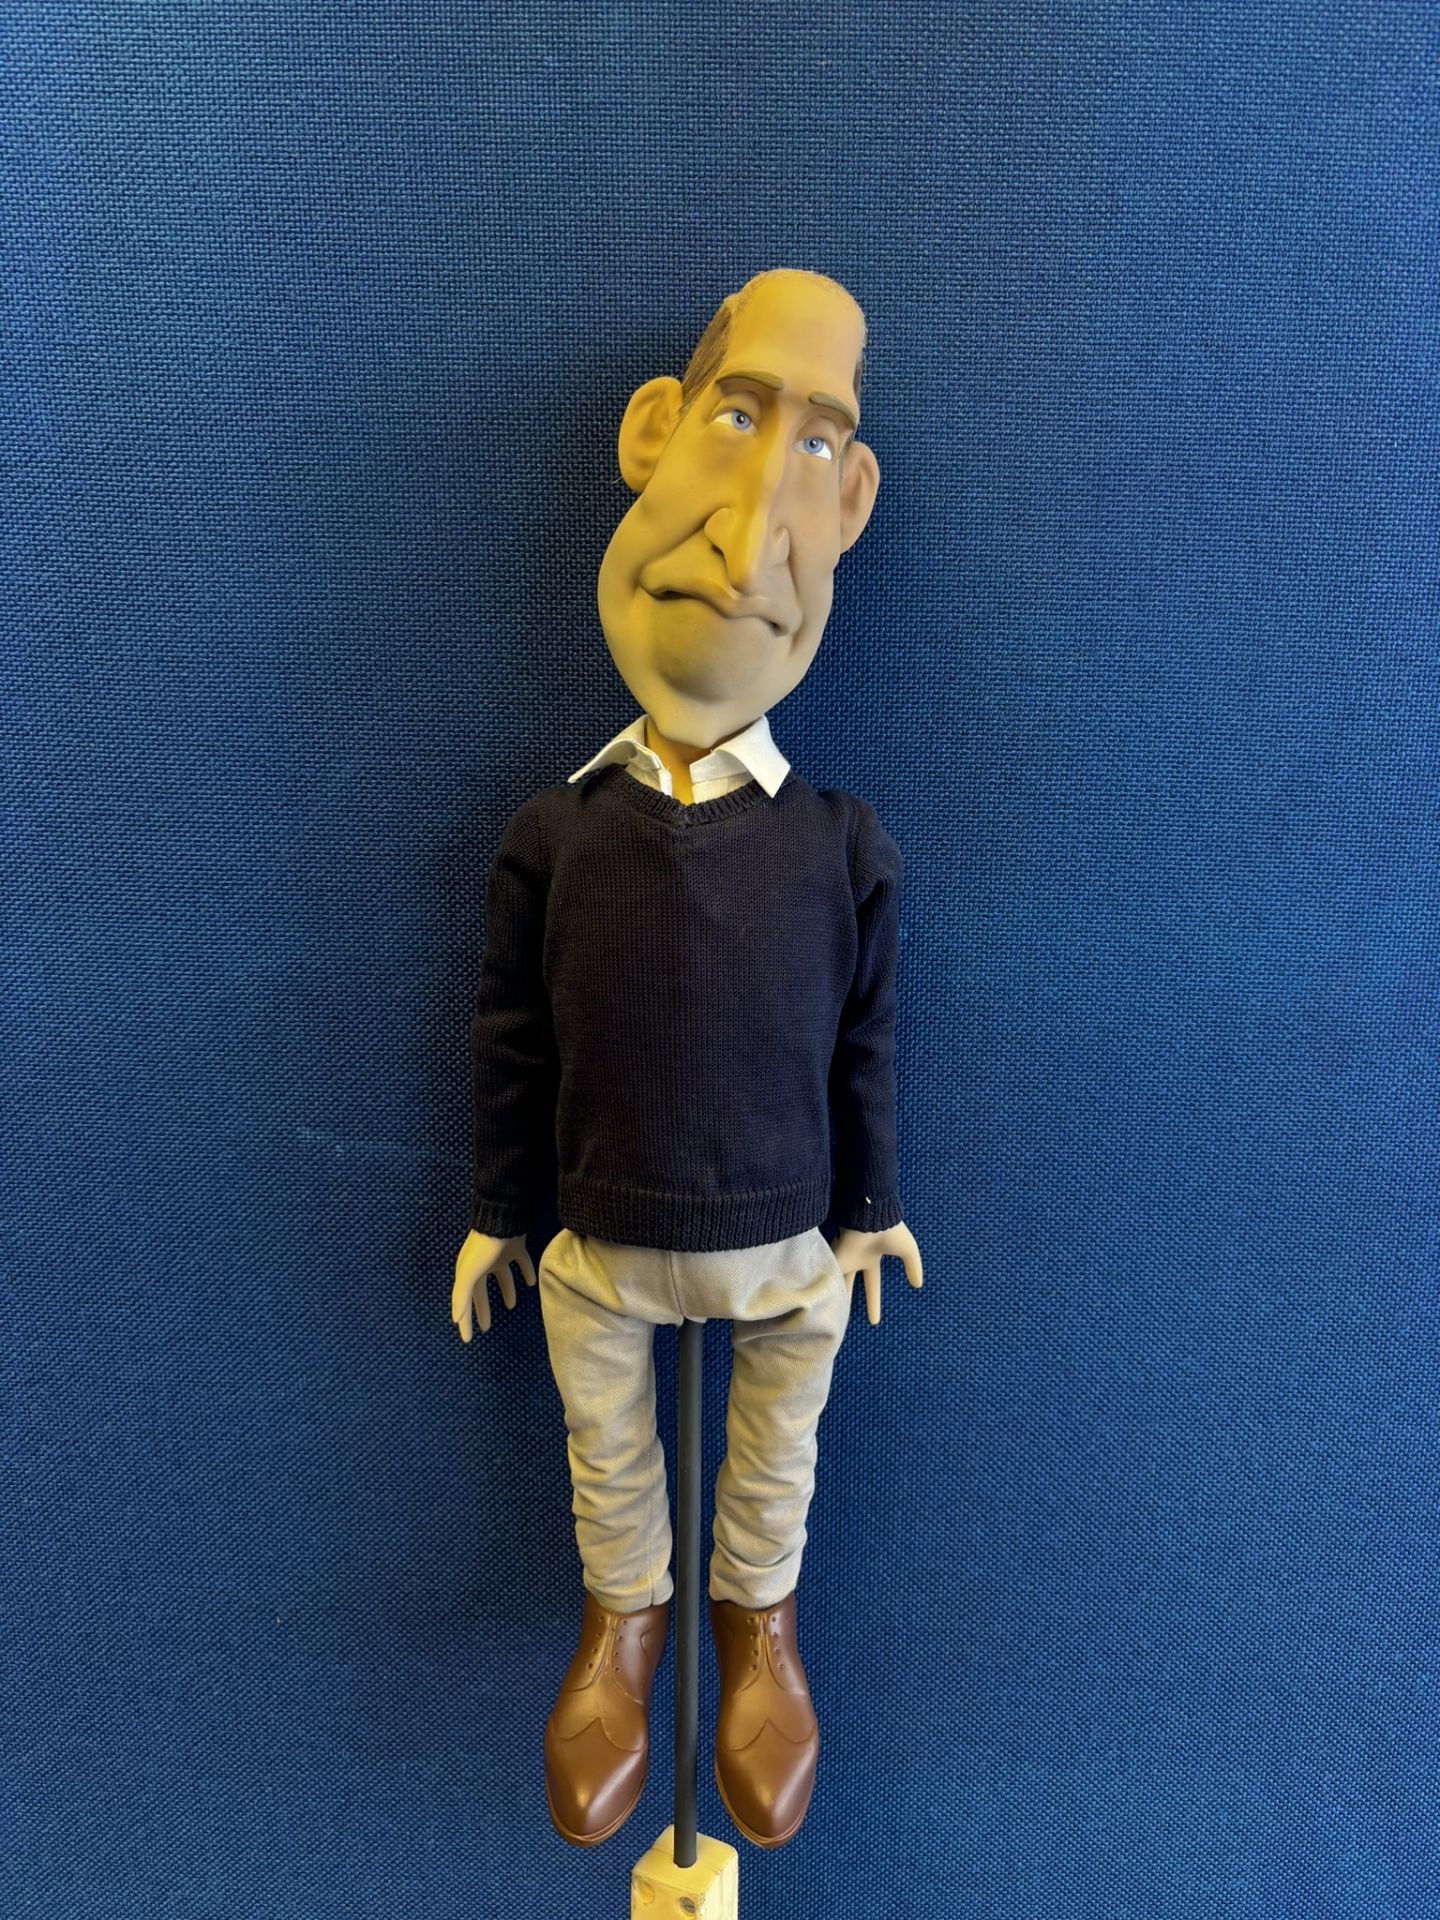 Newzoid puppet - Prince William - Image 2 of 4